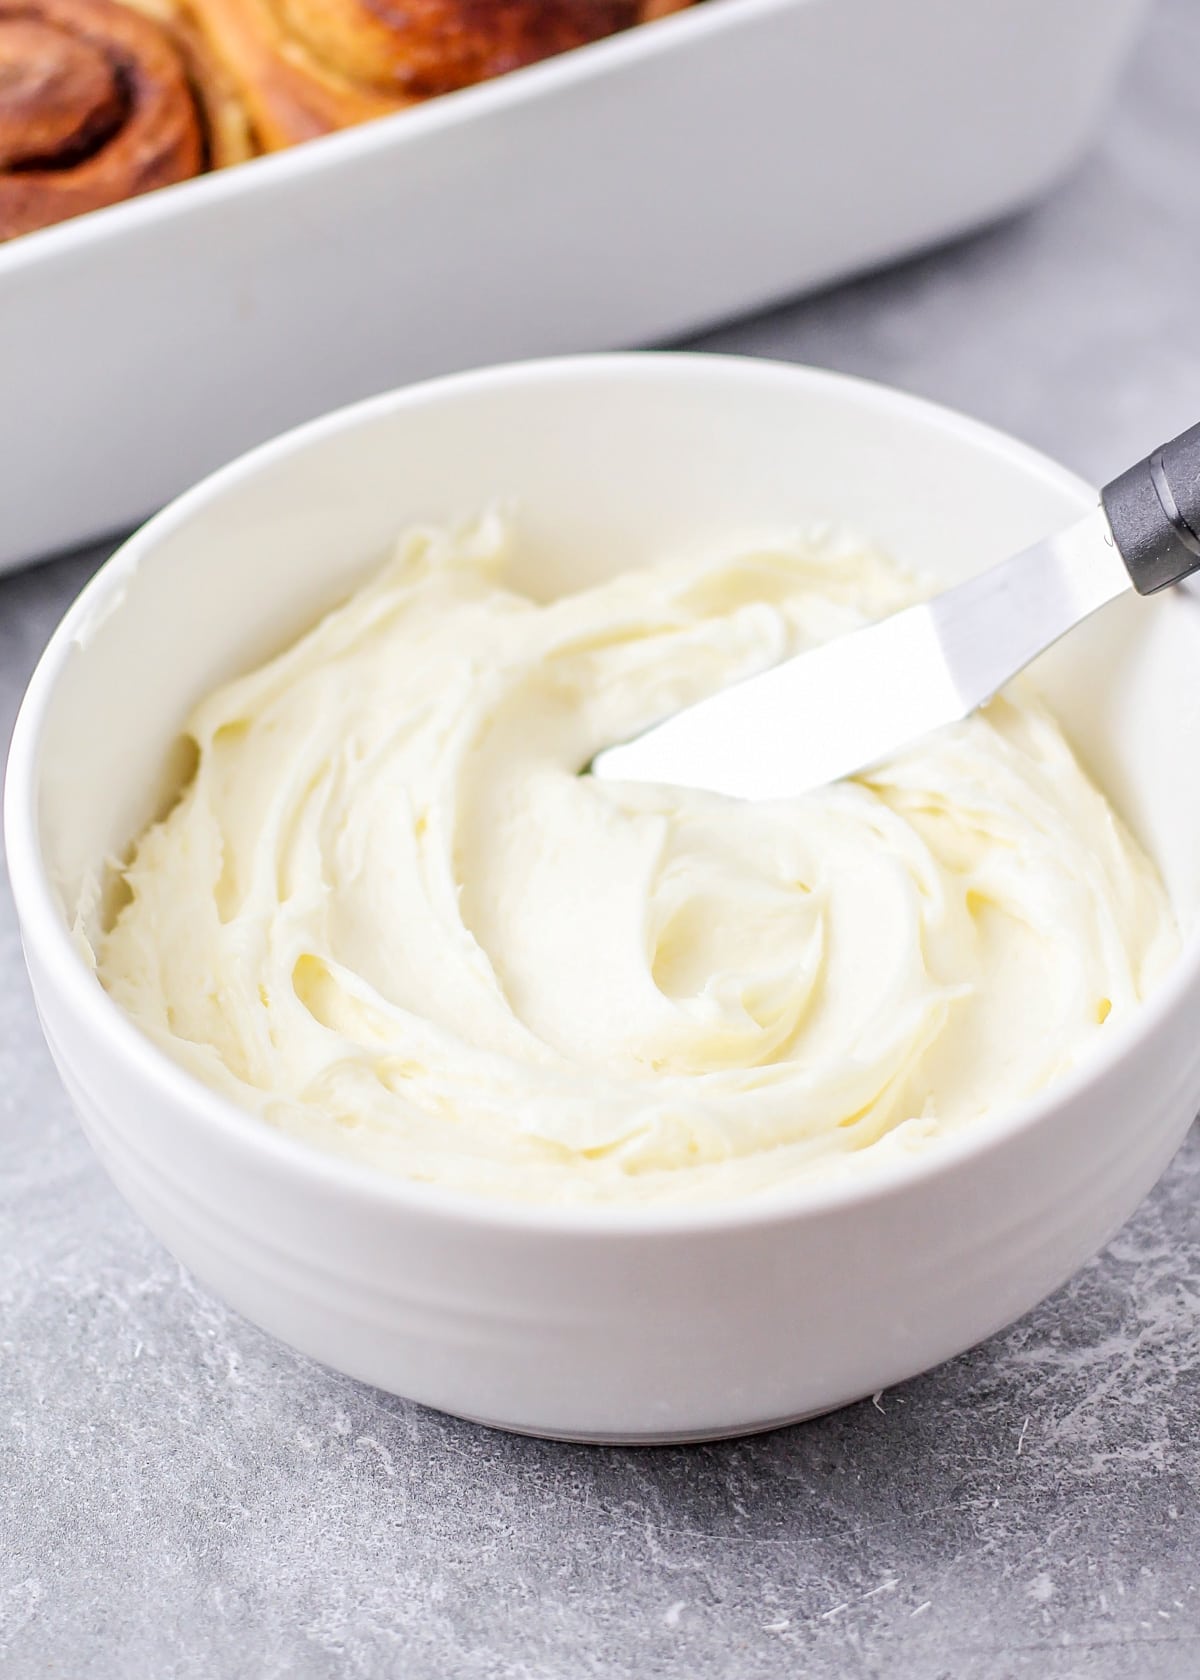 A white bowl filled with cream cheese icing.